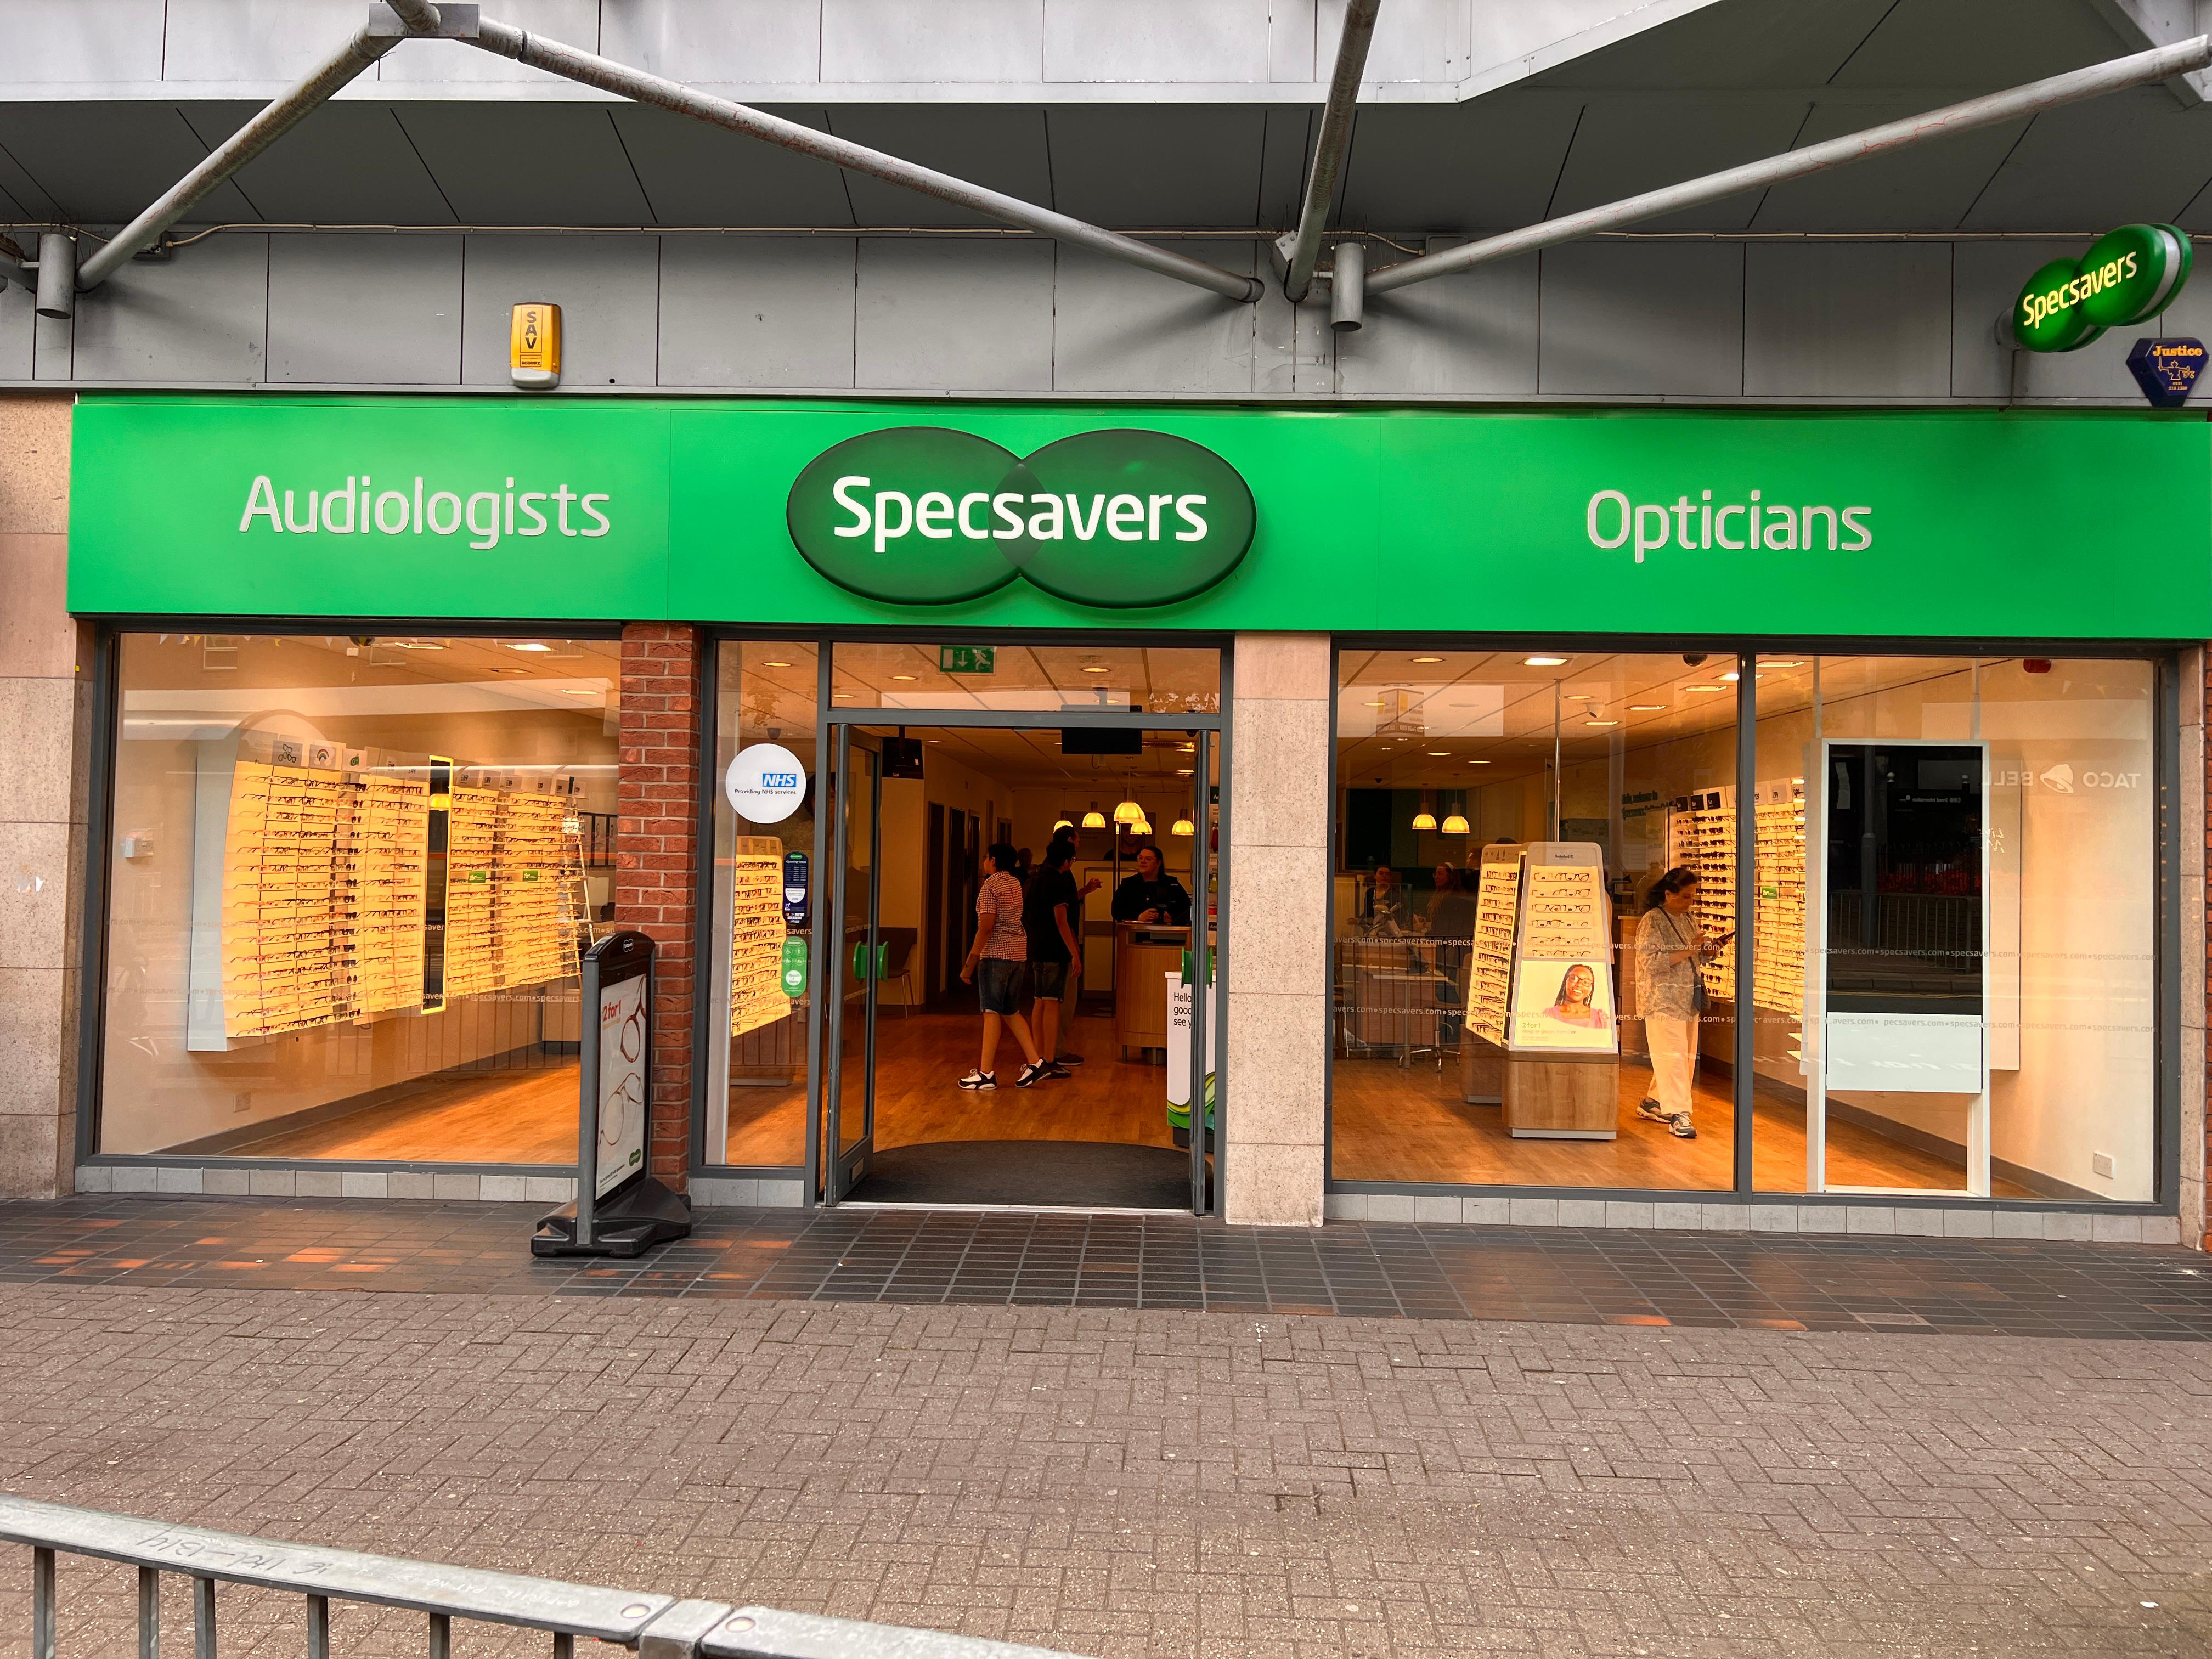 Images Specsavers Opticians and Audiologists - Sutton Coldfield